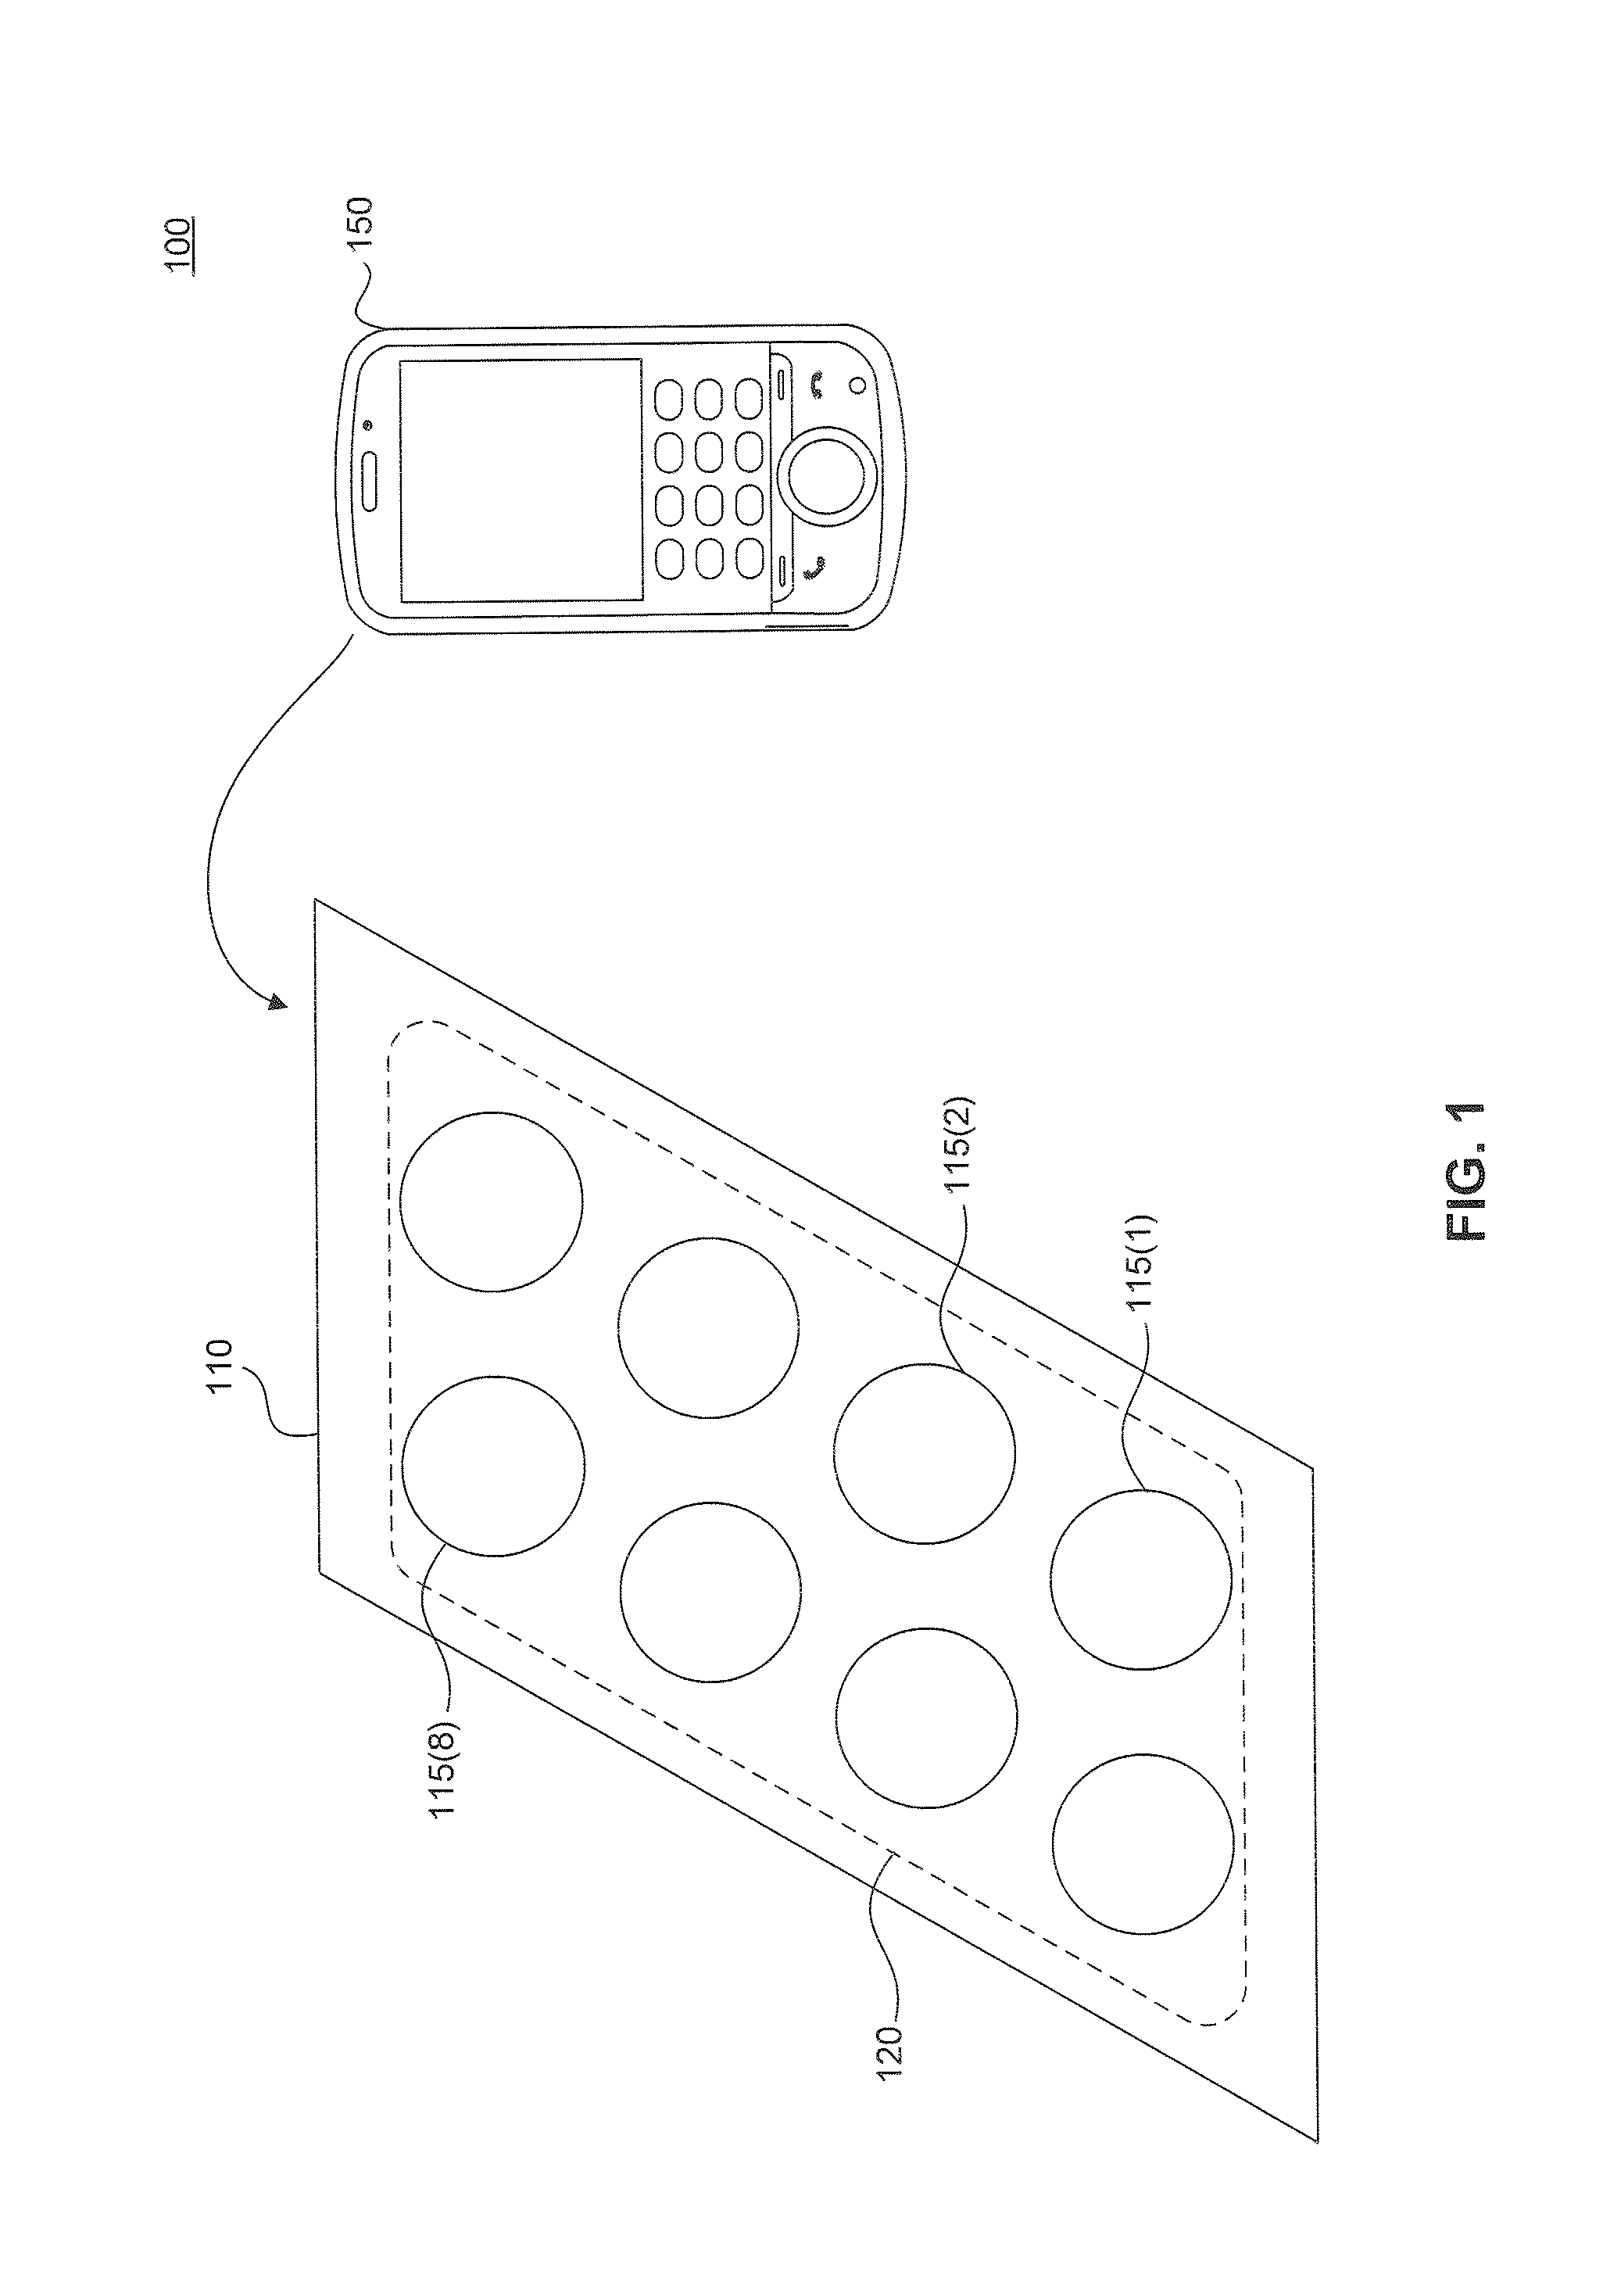 Power Transmitting Device Having Device Discovery and Power Transfer Capabilities